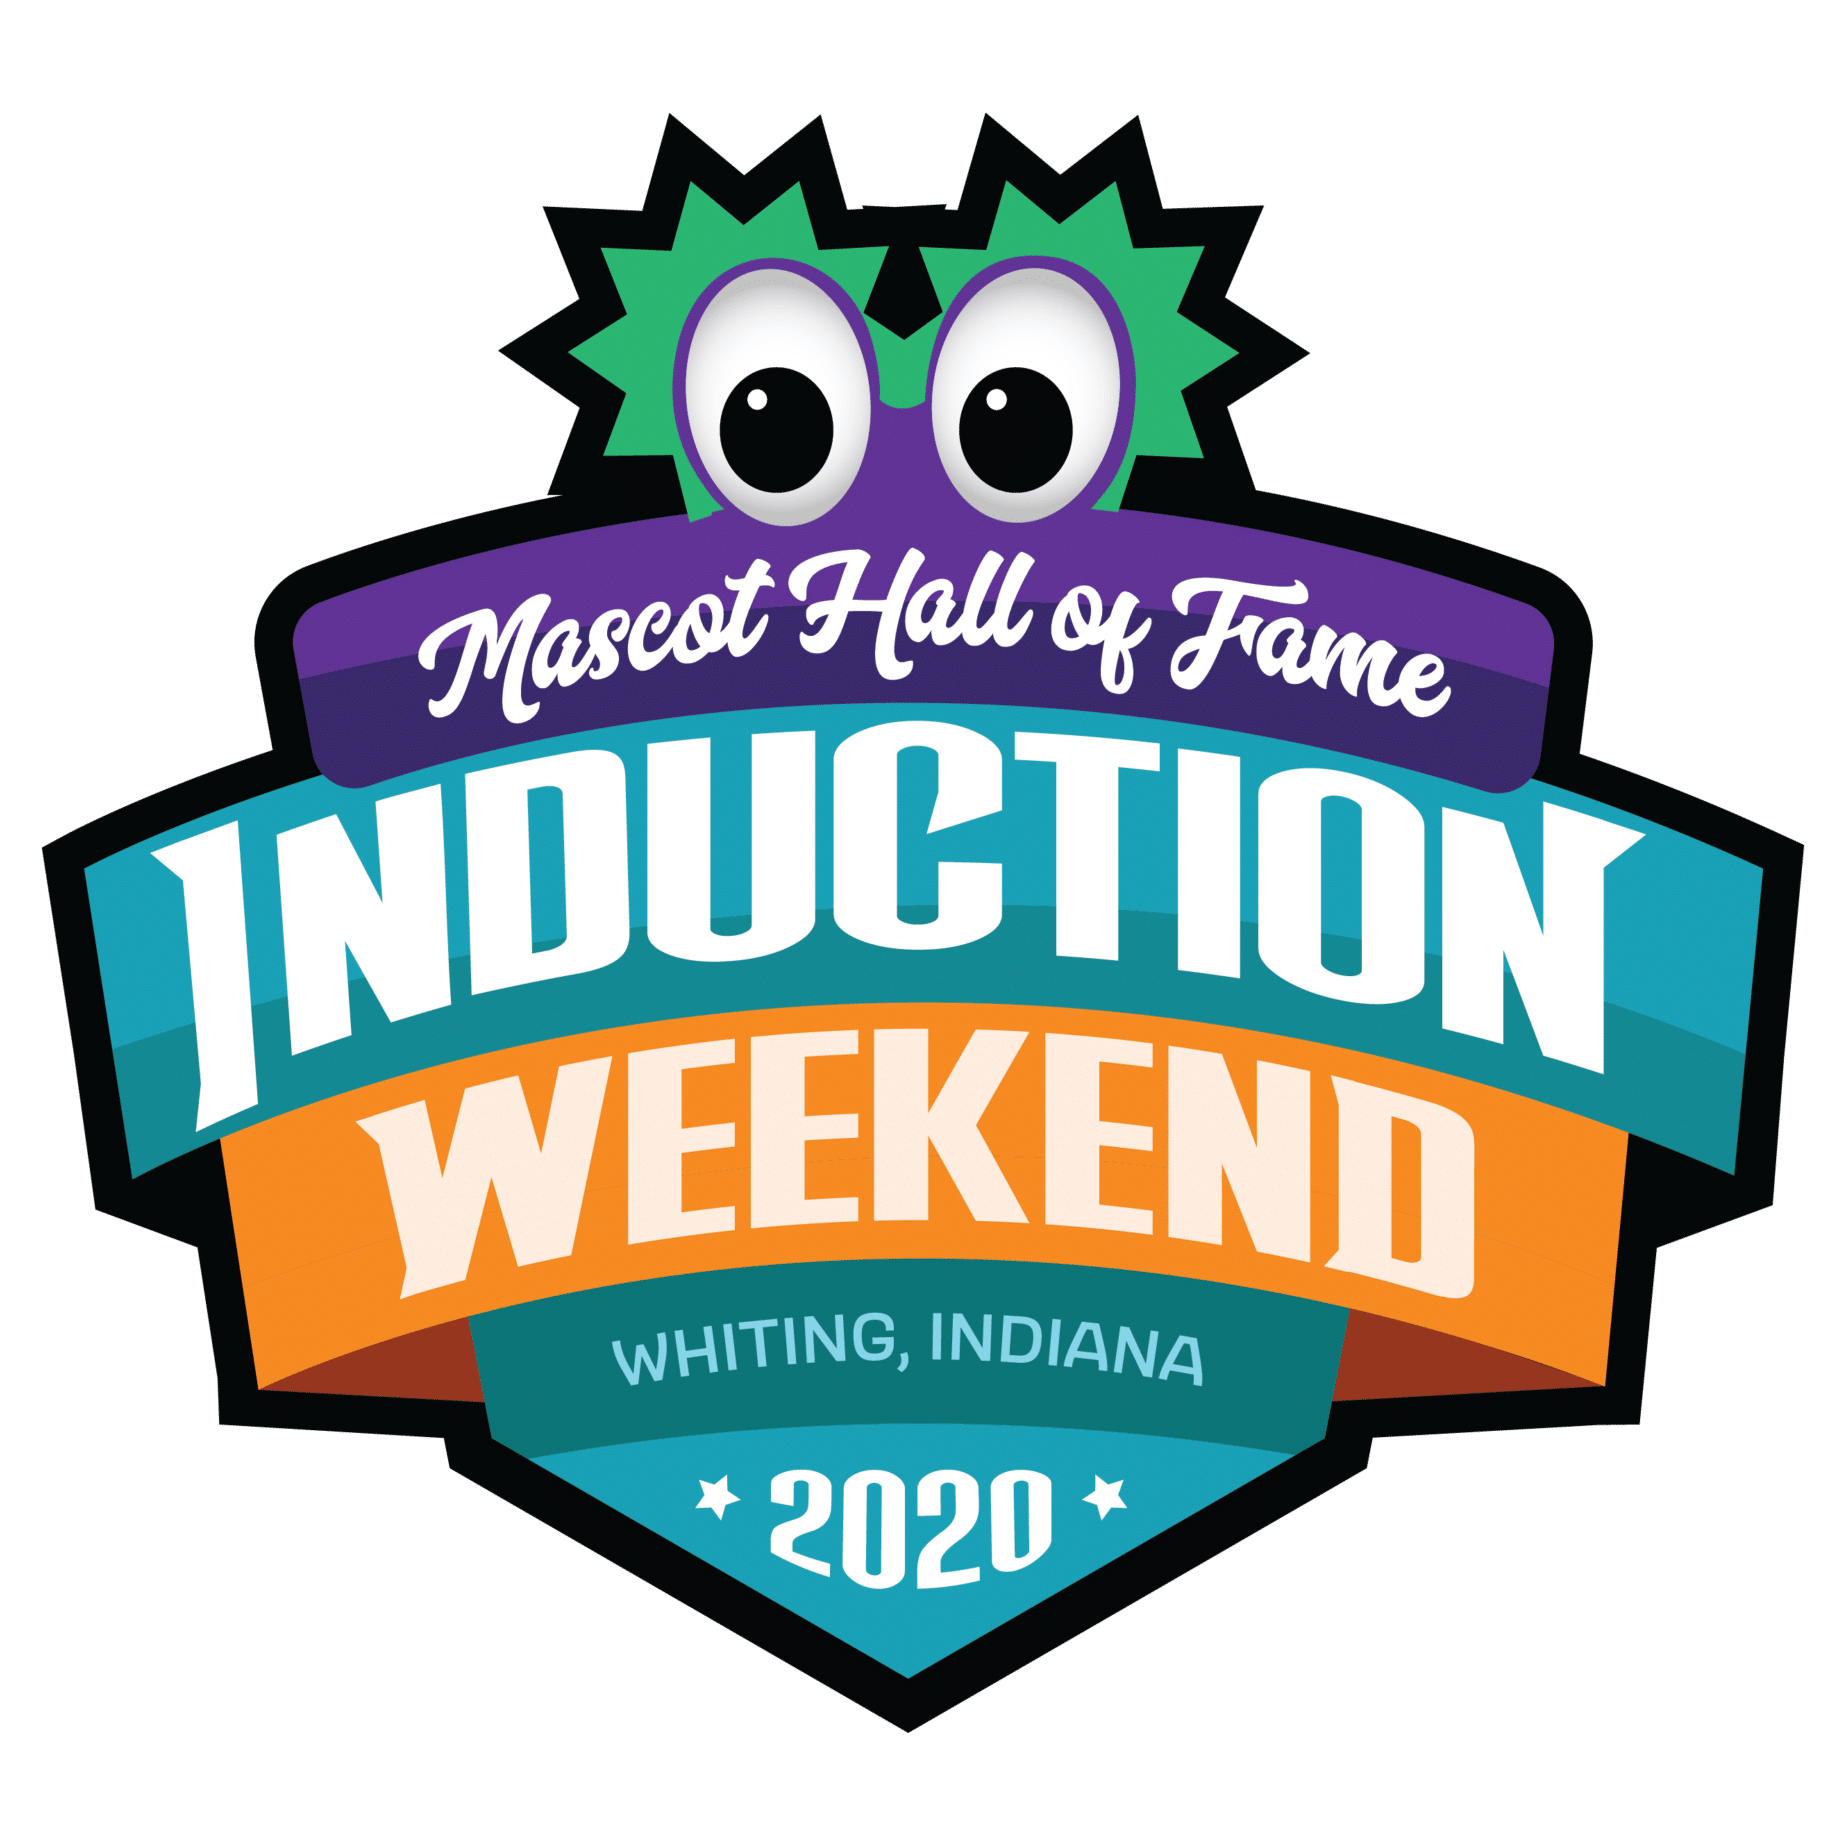 Induction Weekend 2020